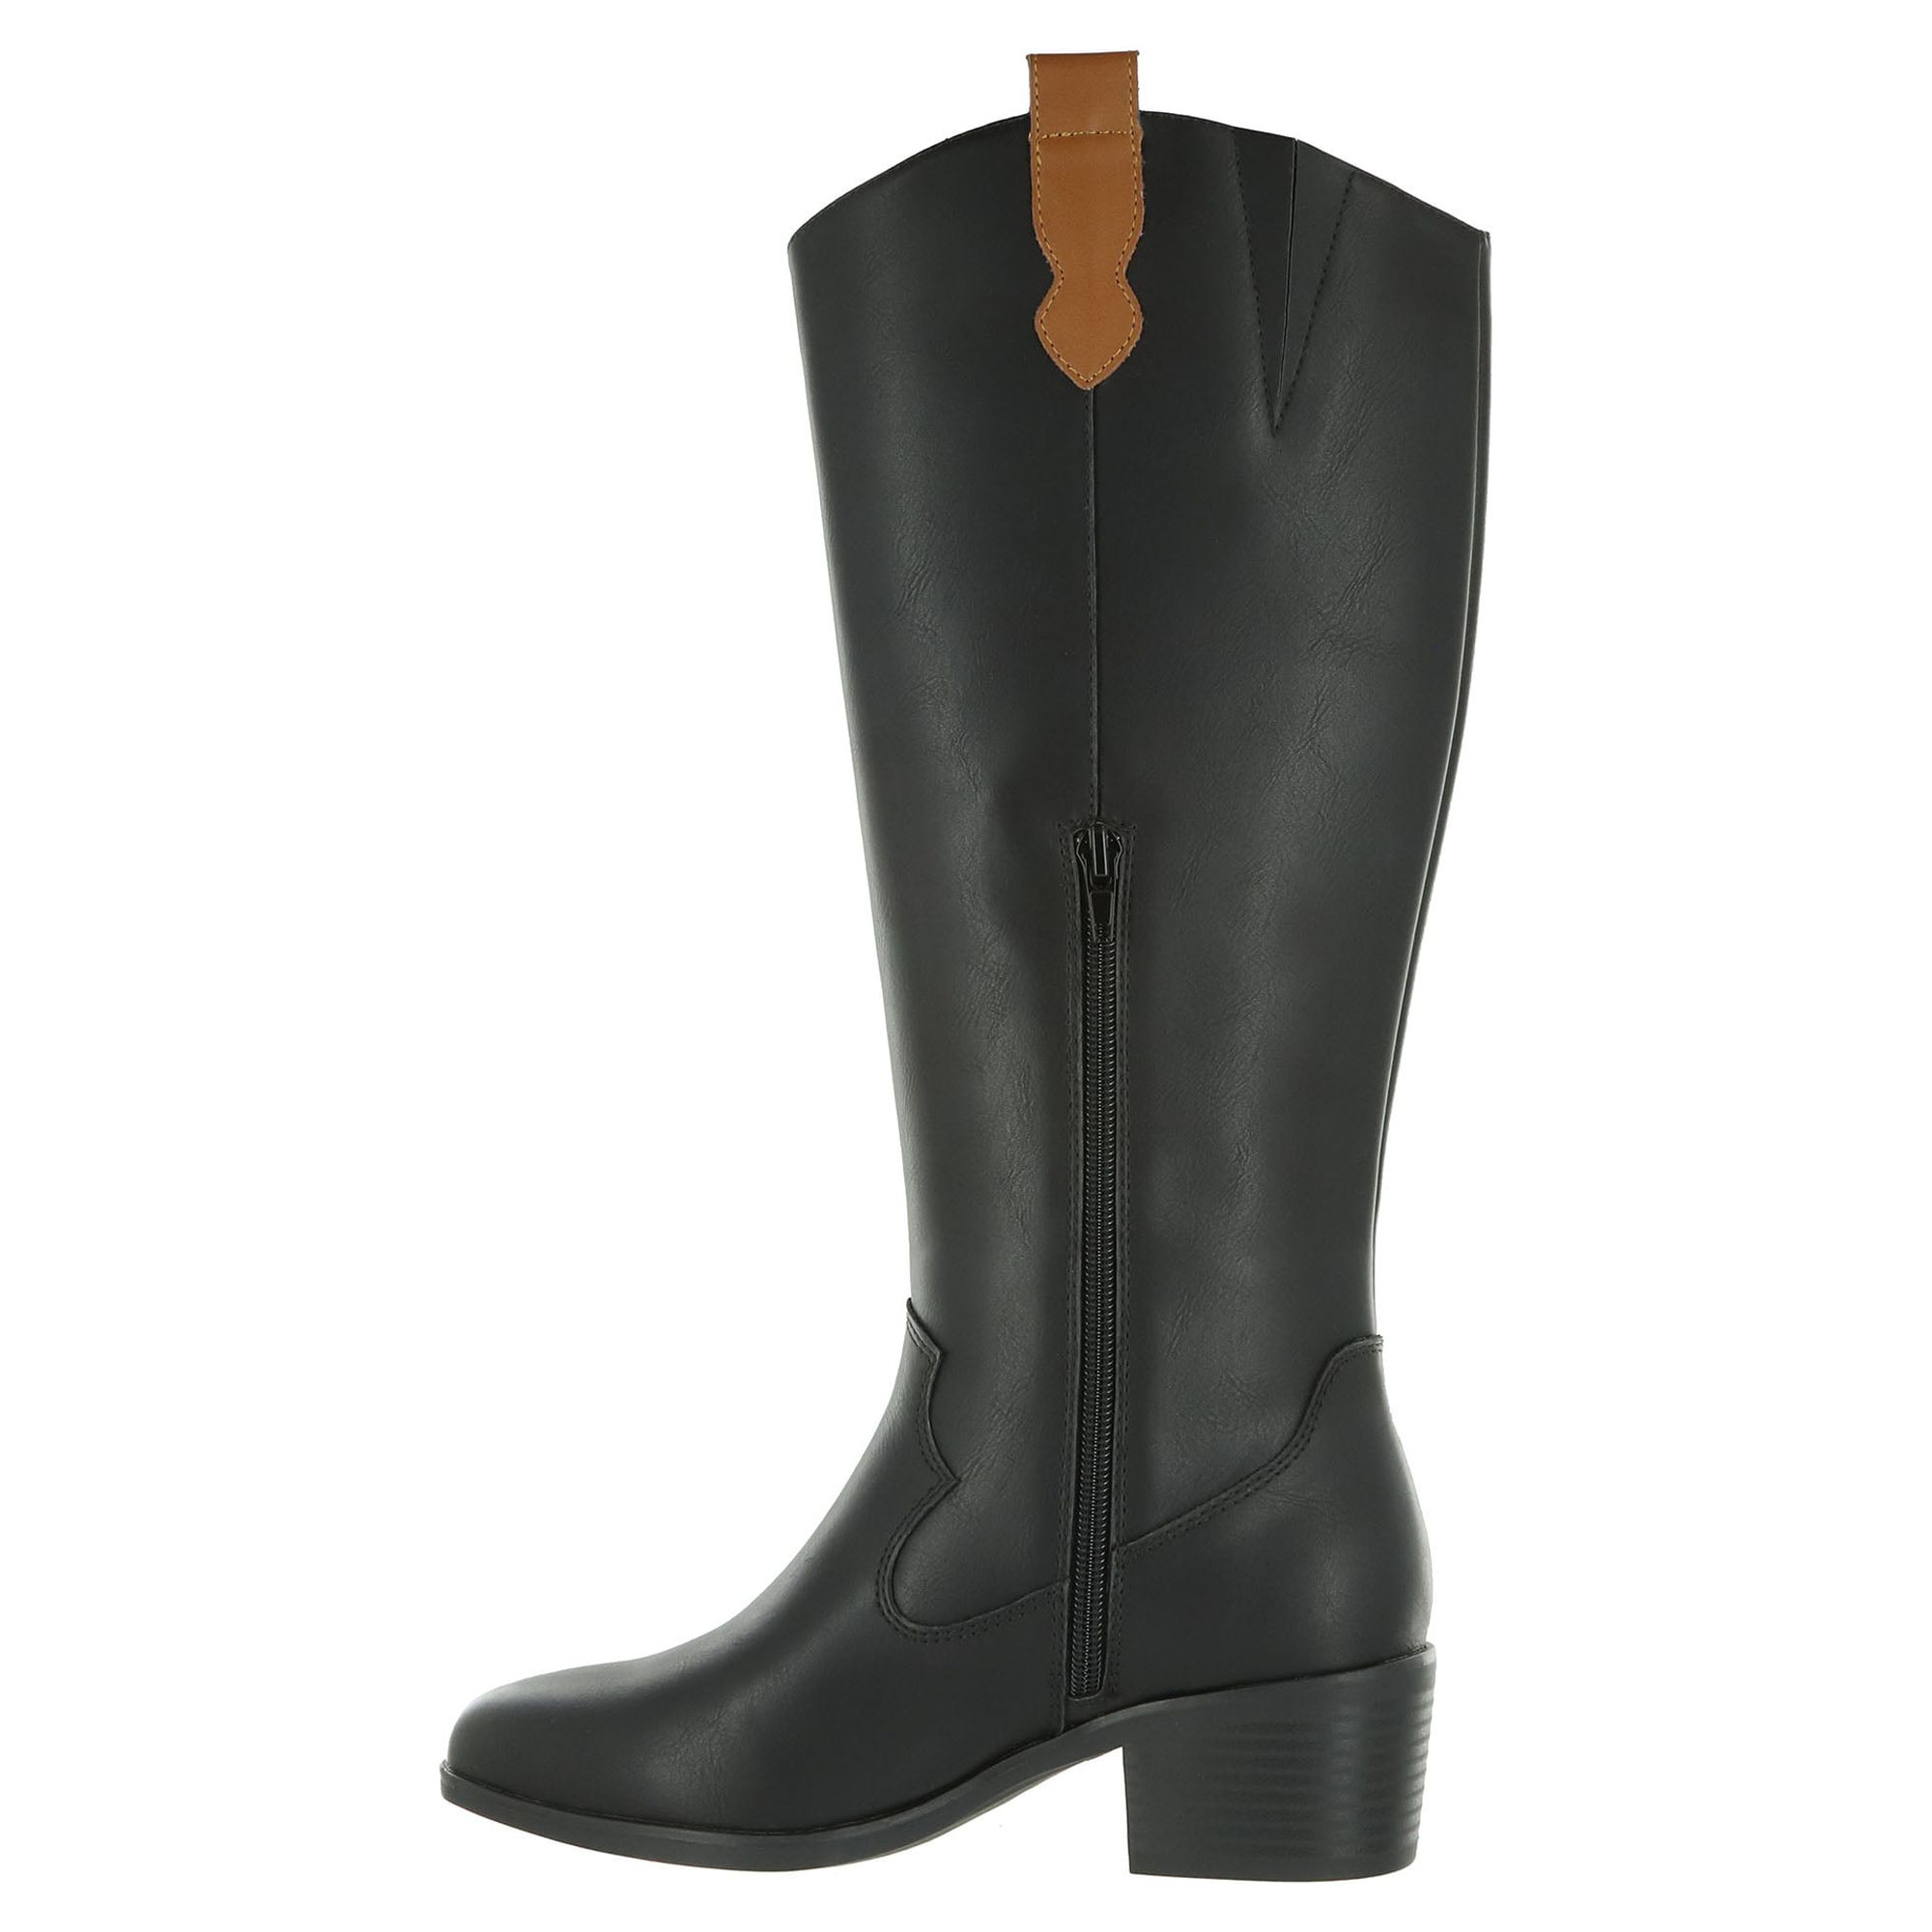 The Pioneer Woman Western Riding Boots, Women's, Wides Available - image 5 of 6